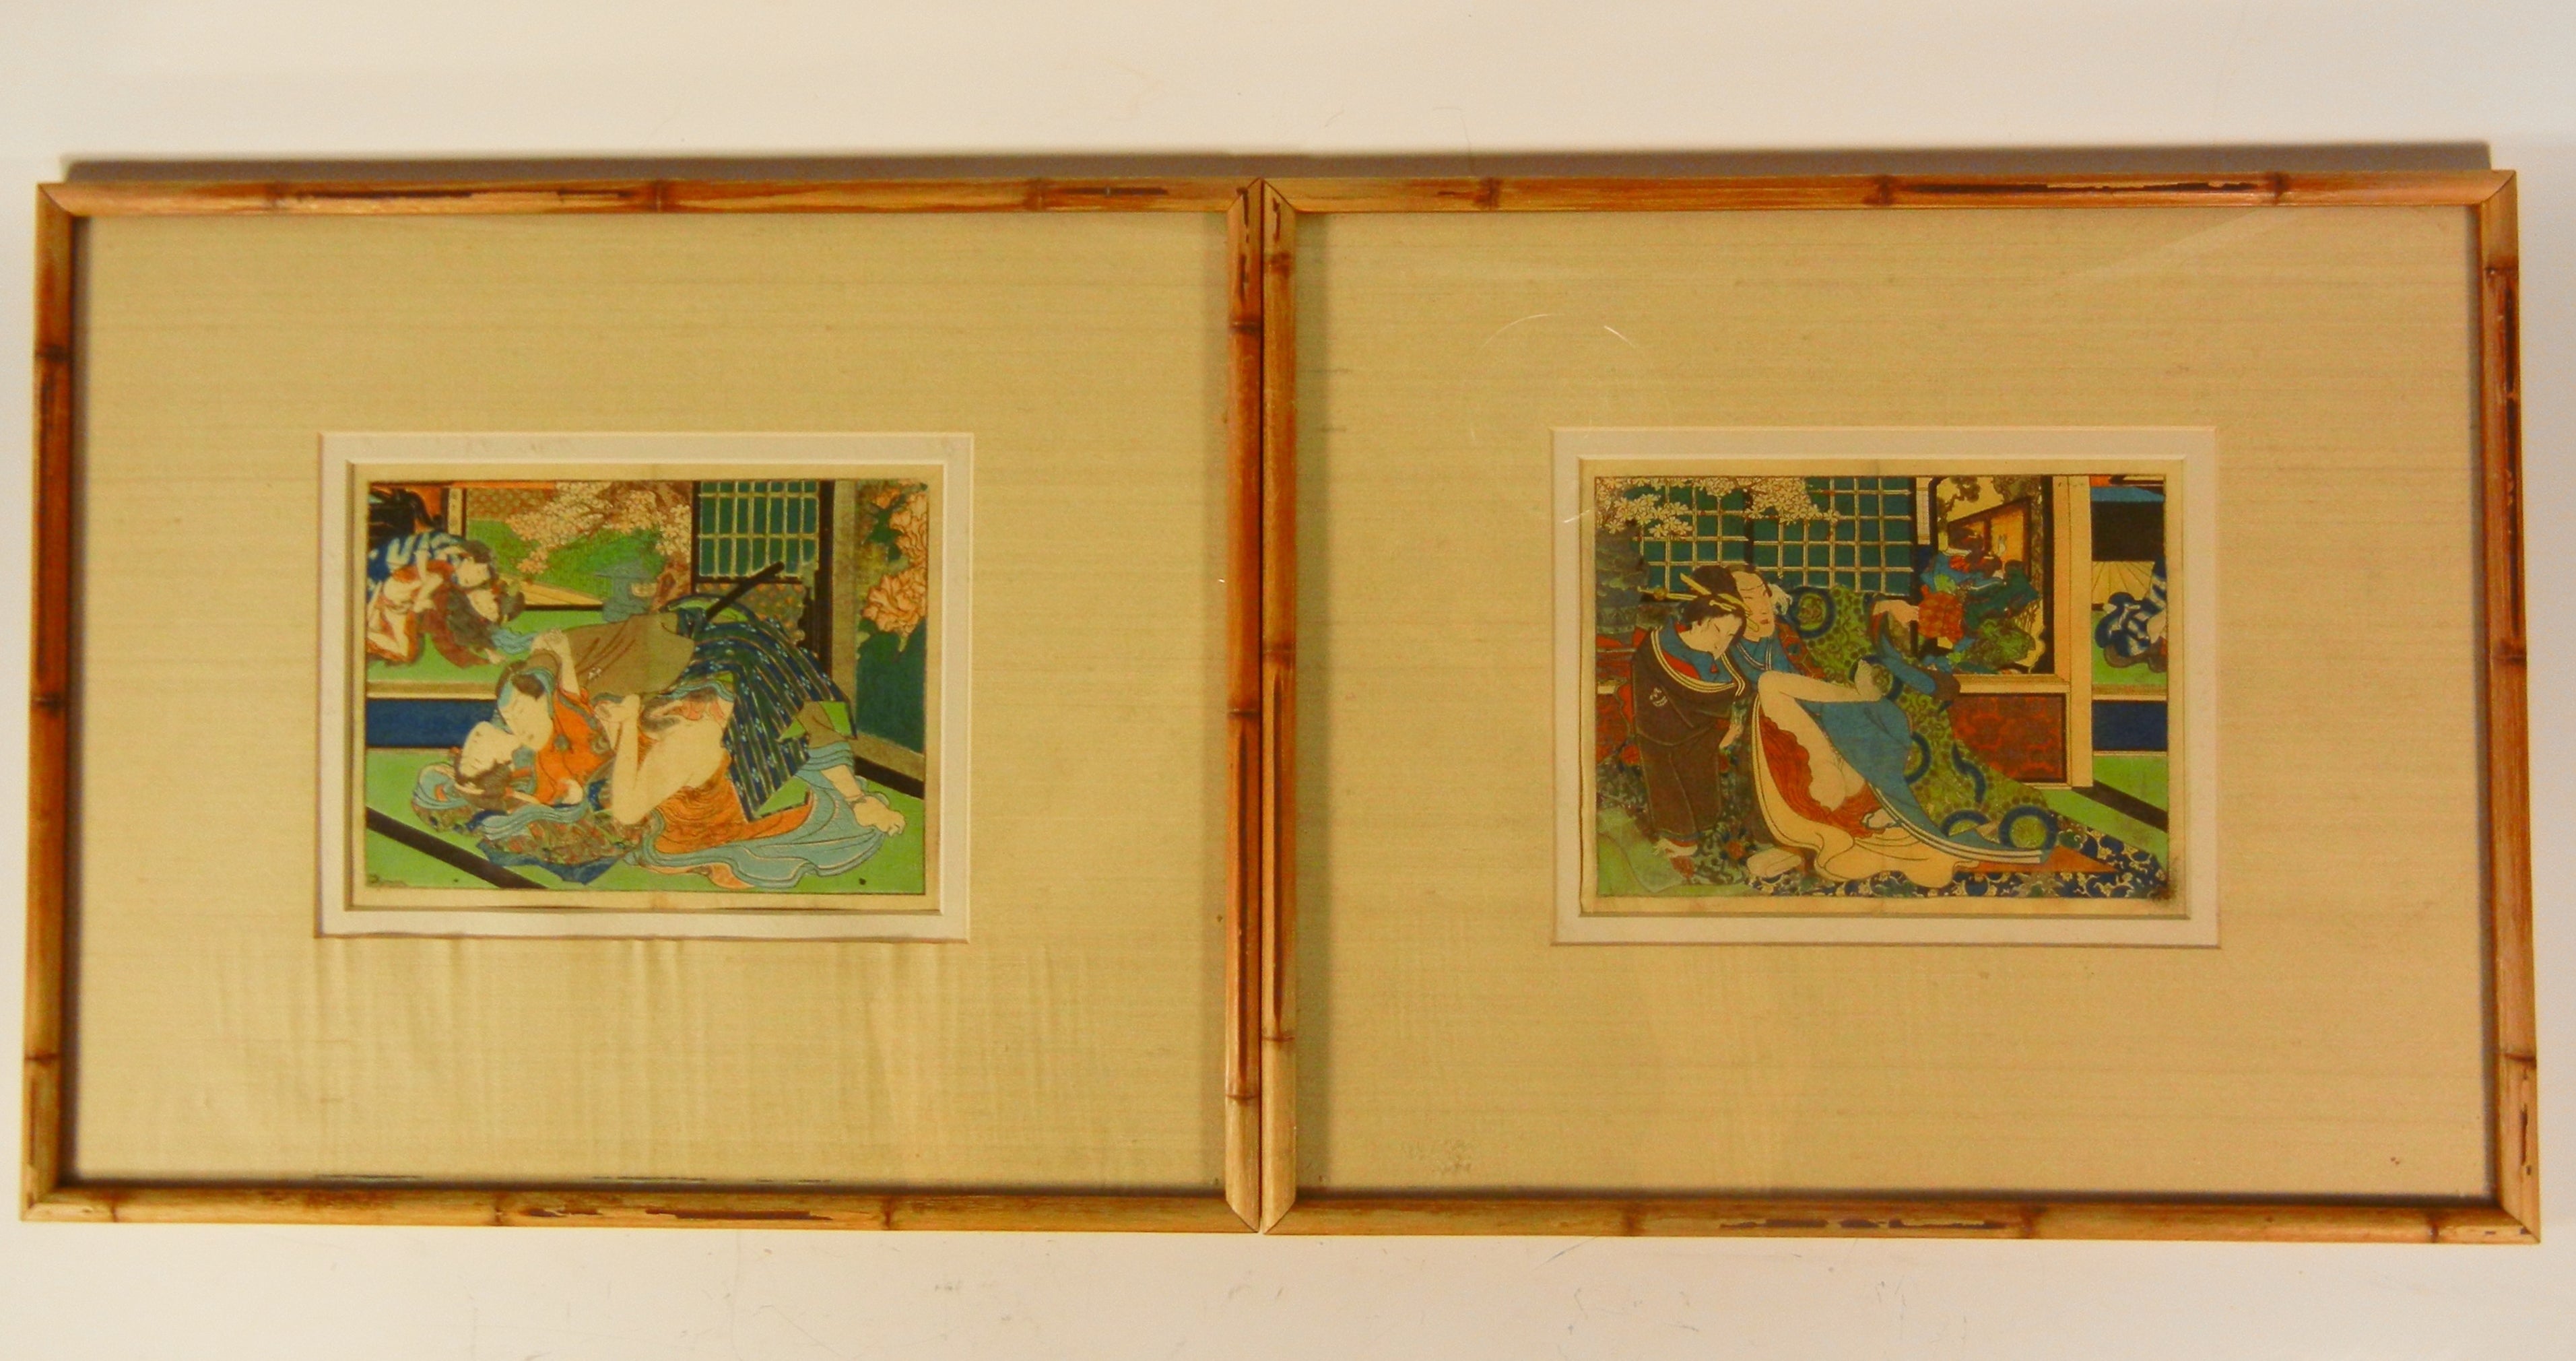 Two Shunga Woodblock Prints, Erotica by Anonymous, Japan c. 1860